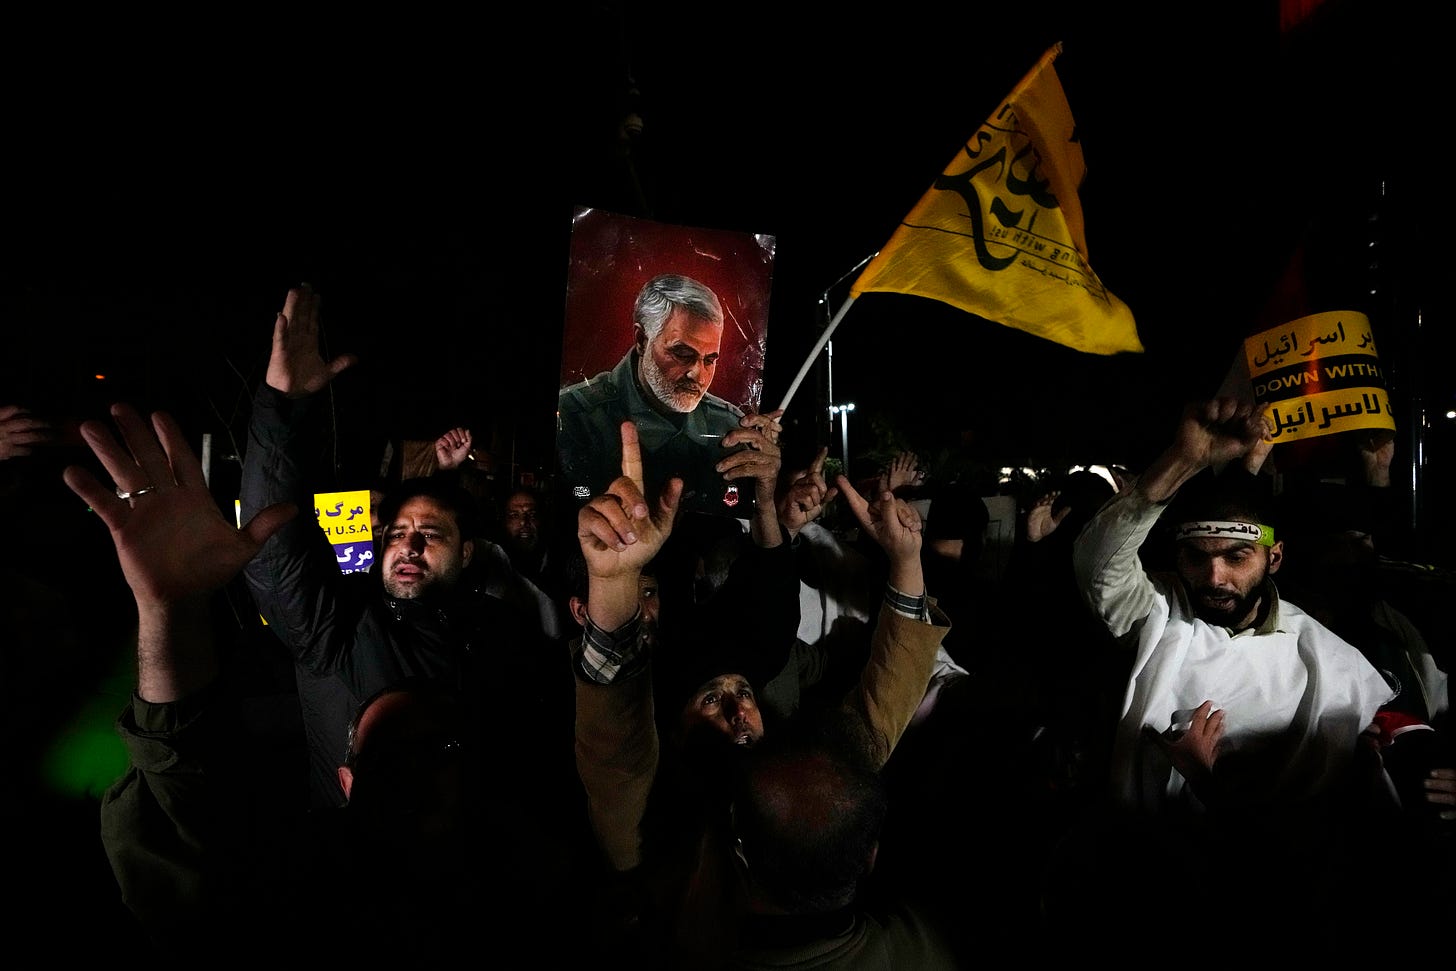 Iranian demonstrators chant slogans as one of them holds up a poster of the late Revolutionary Guard Gen. Qassem Soleimani, who was killed in a U.S. drone attack in 2020 in Iraq, during a protest against the U.S. and British military strike against Iranian-backed Houthis in Yemen, in front of the British Embassy in Tehran, Iran.